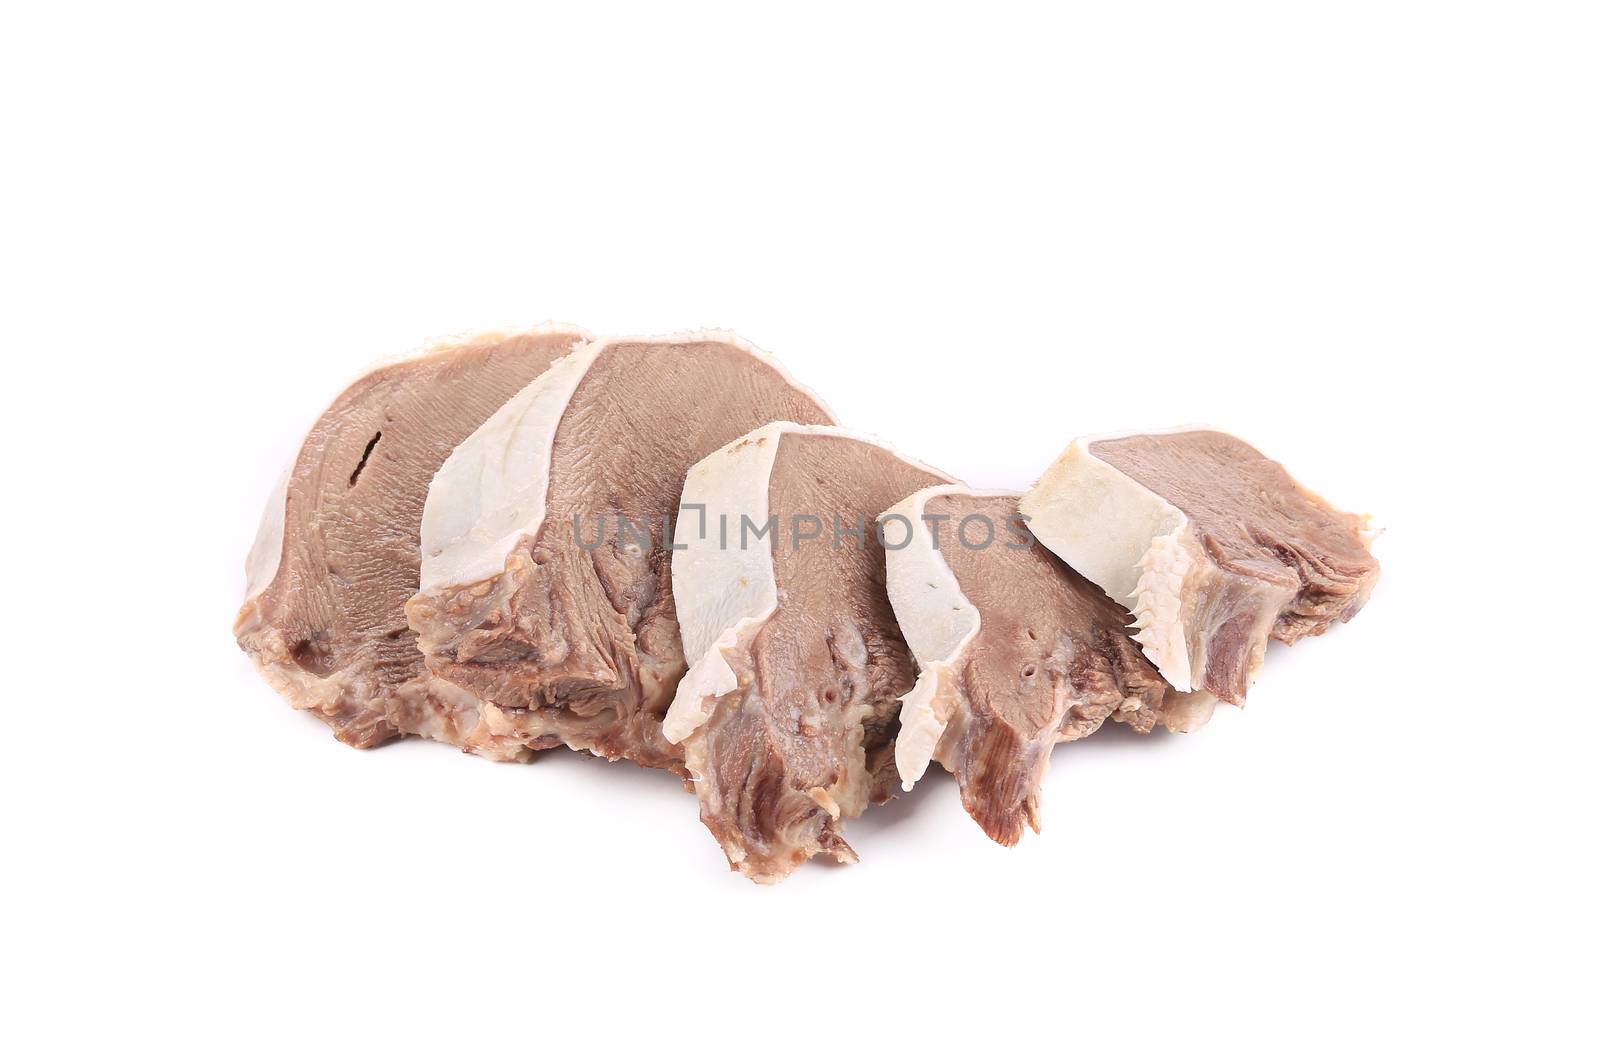 Raw chopped cow tongue. Isolated on a white background.